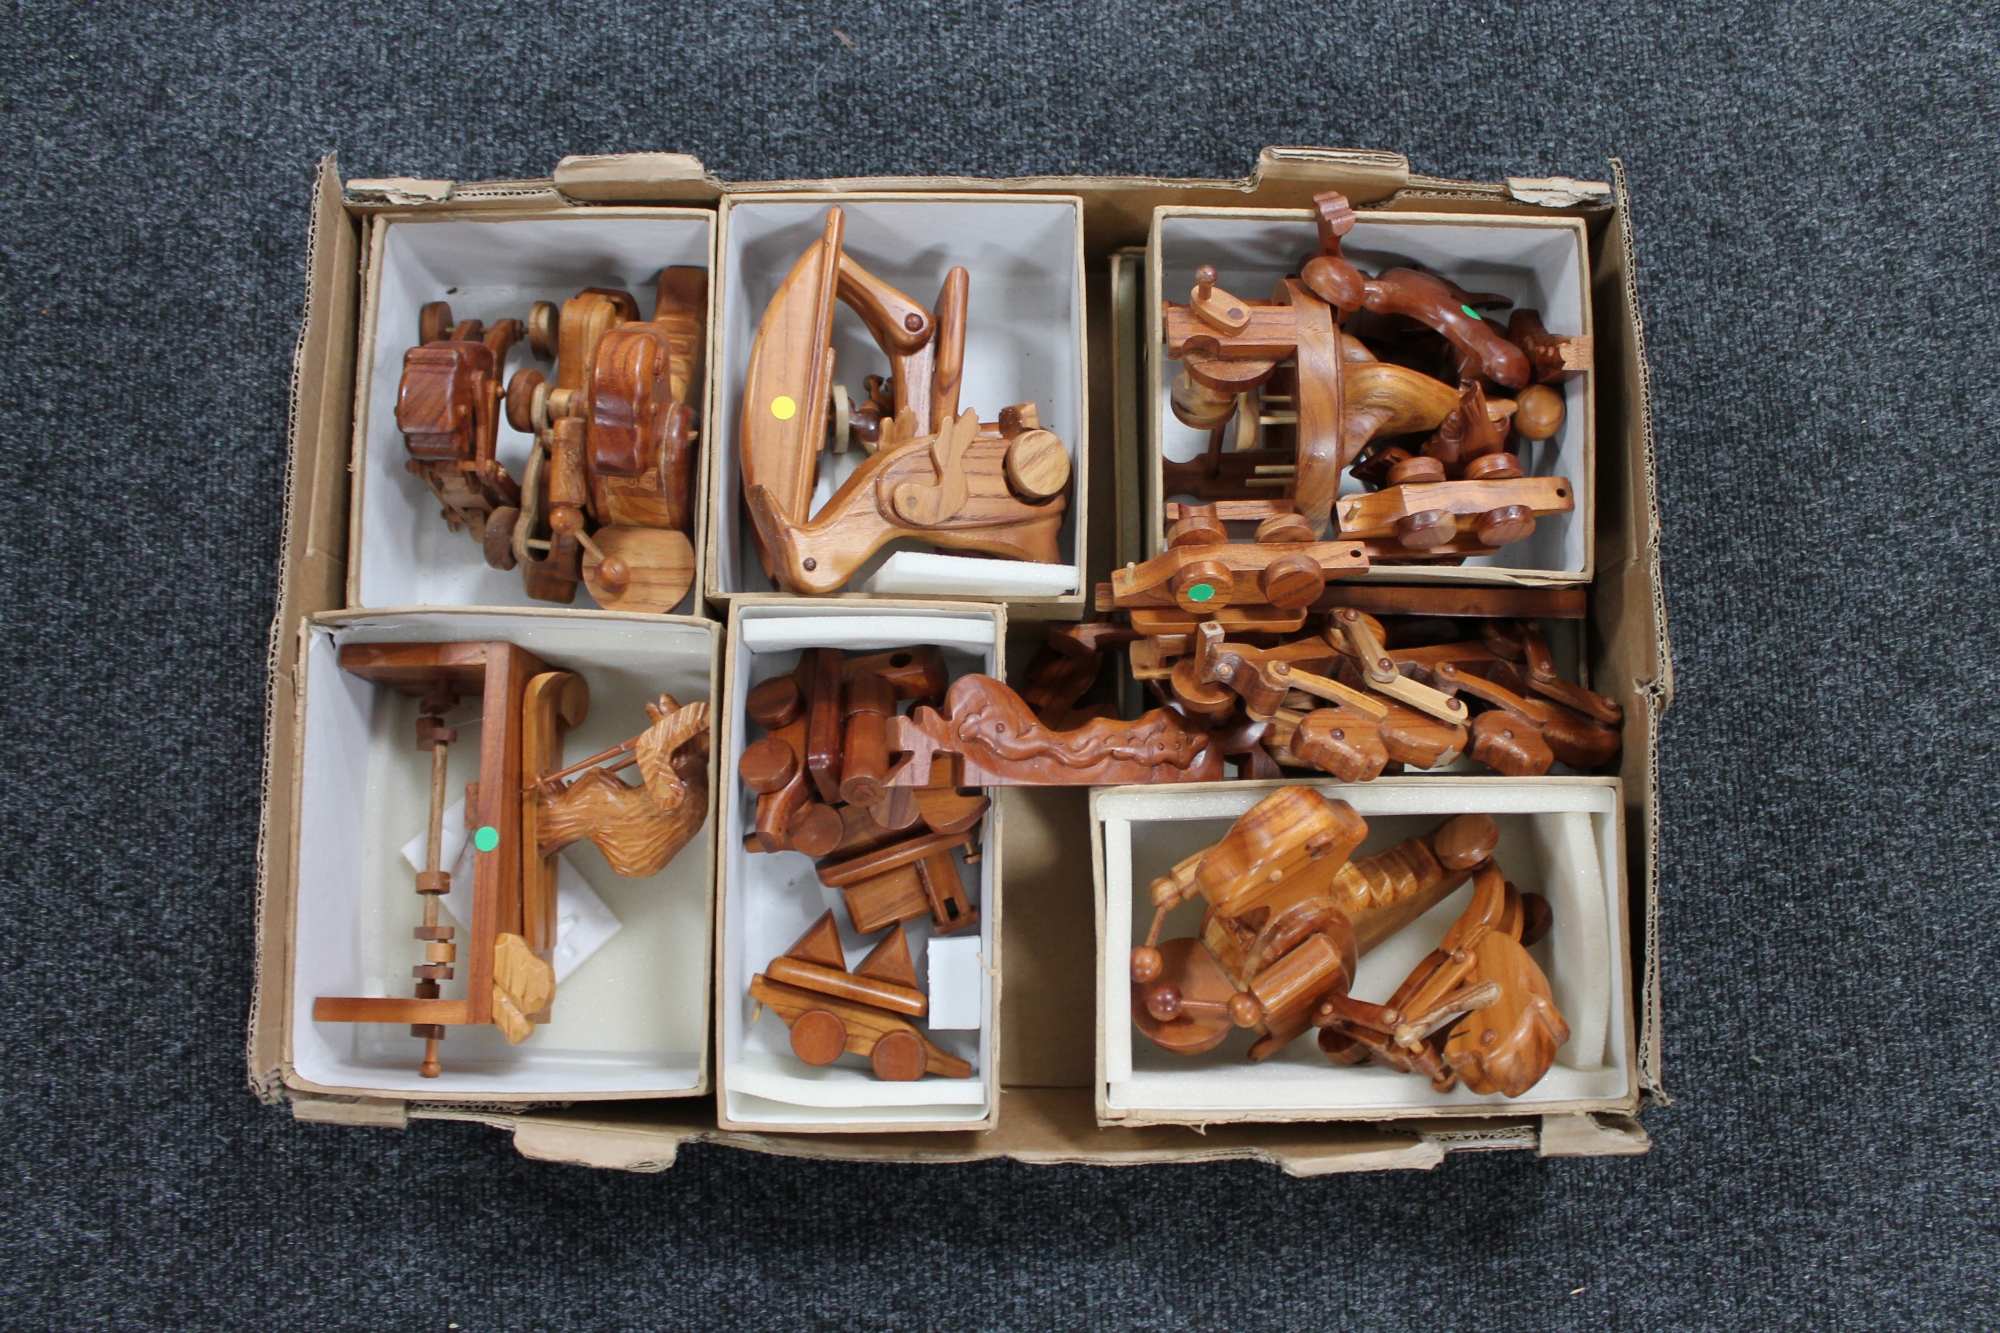 A box of wooden articulated toys